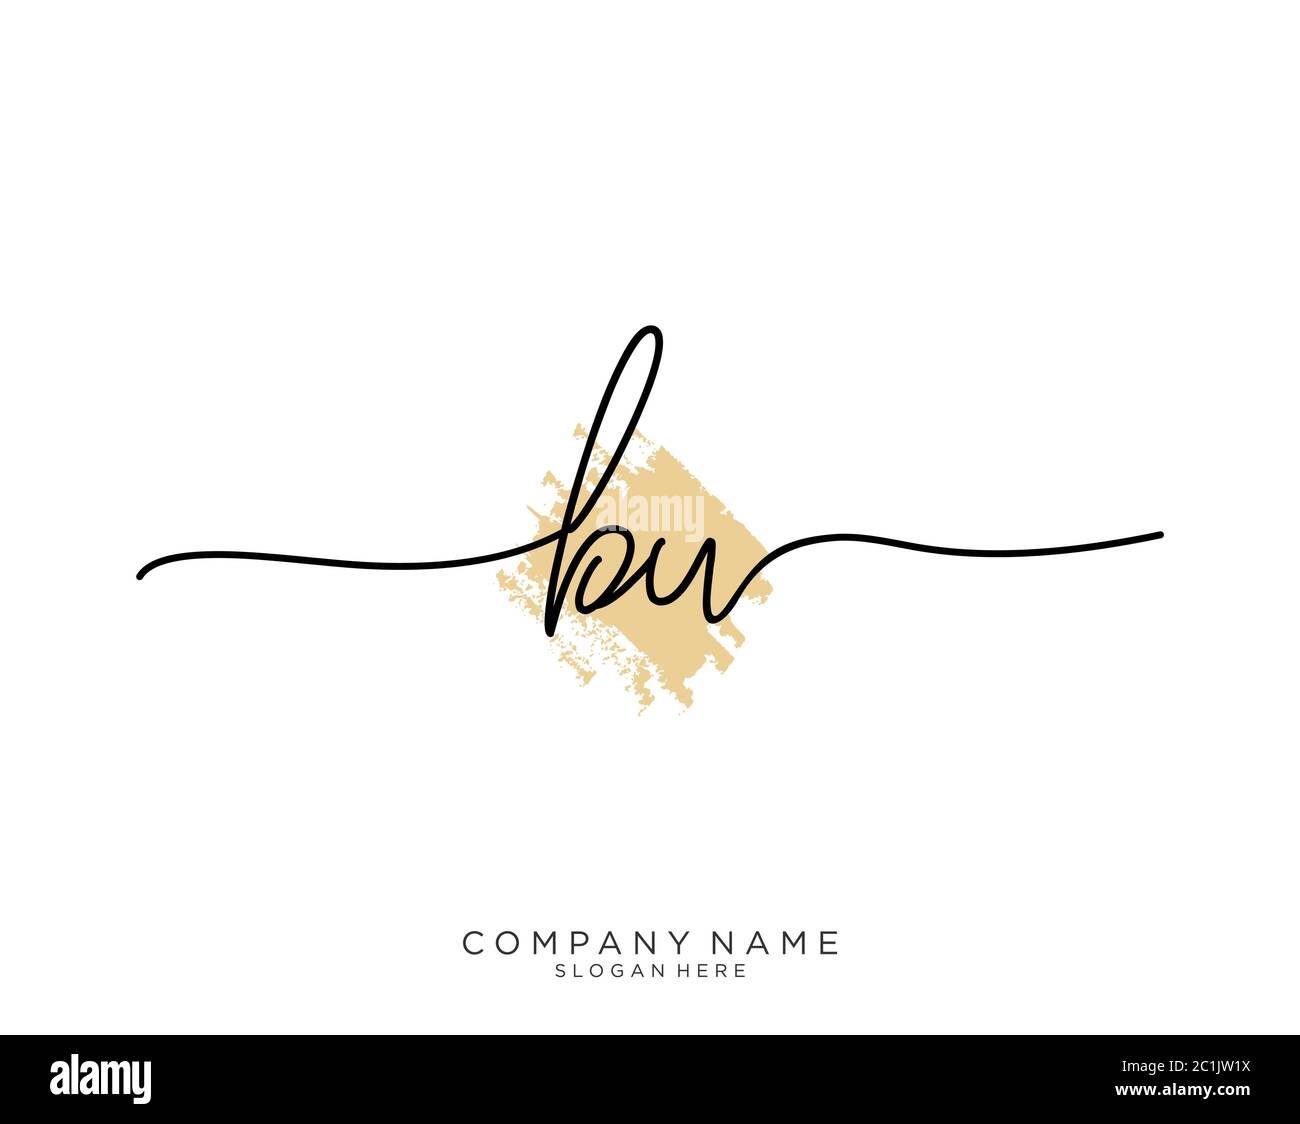 BW Initial handwriting logo with brush template vector Stock Vector